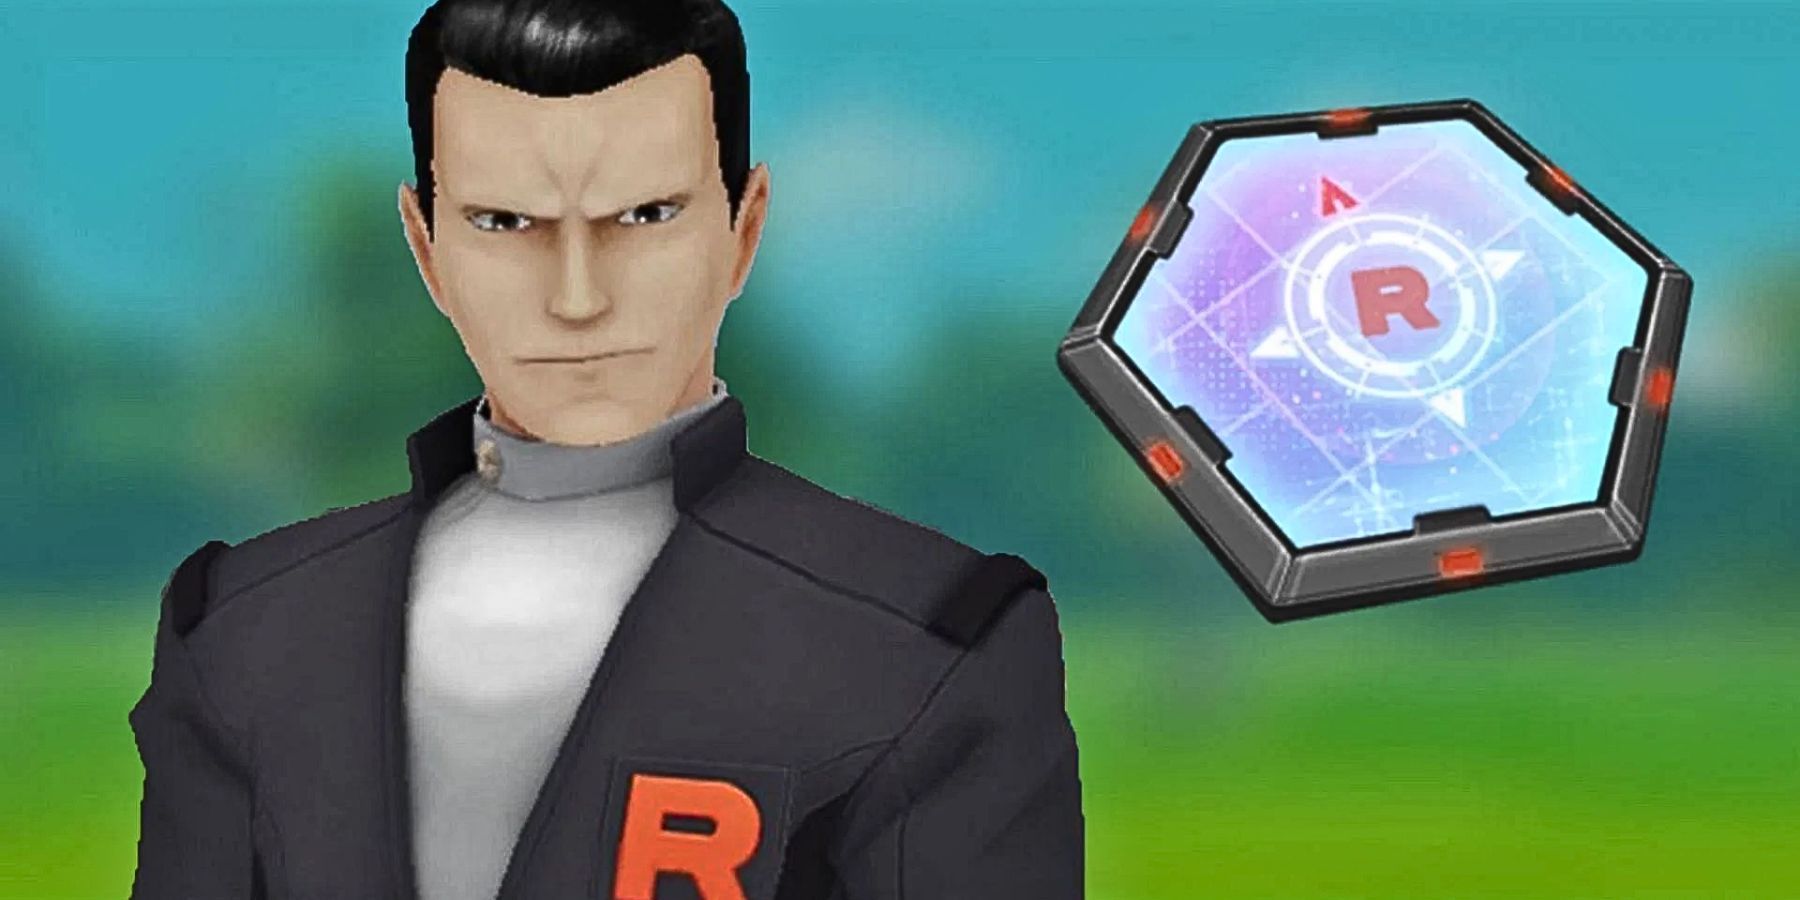 How to find and beat Giovanni in Pokémon Go - December 2023 - Dot Esports